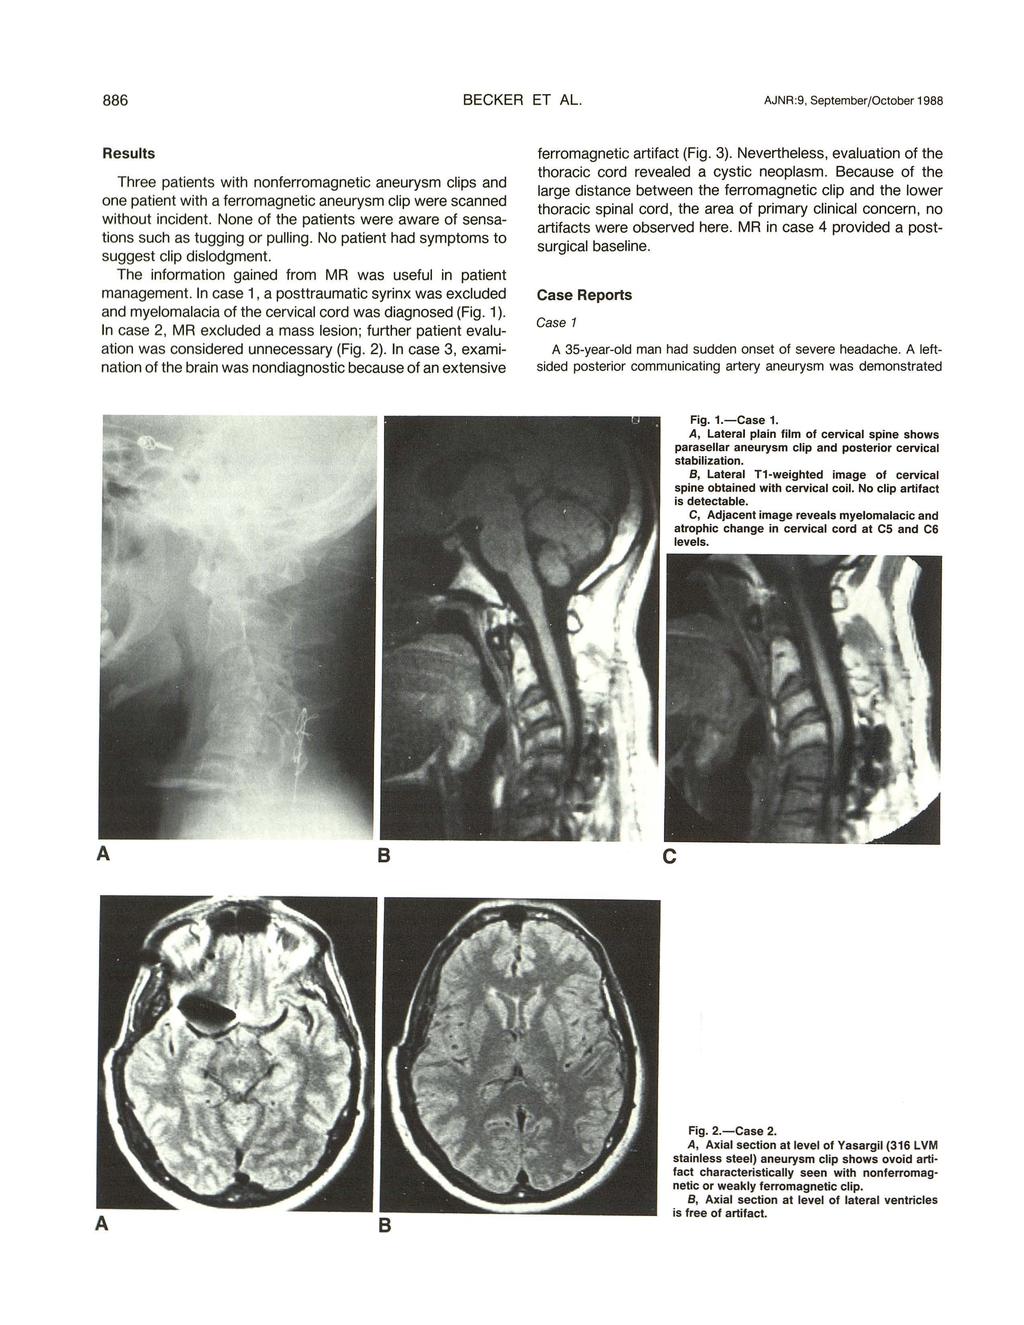 886 BECKER ET AL. AJNR :9, September/October 1988 Results Three patients with nonferromagnetic aneurysm clips and one patient with a ferromagnetic aneurysm clip were scanned without incident.